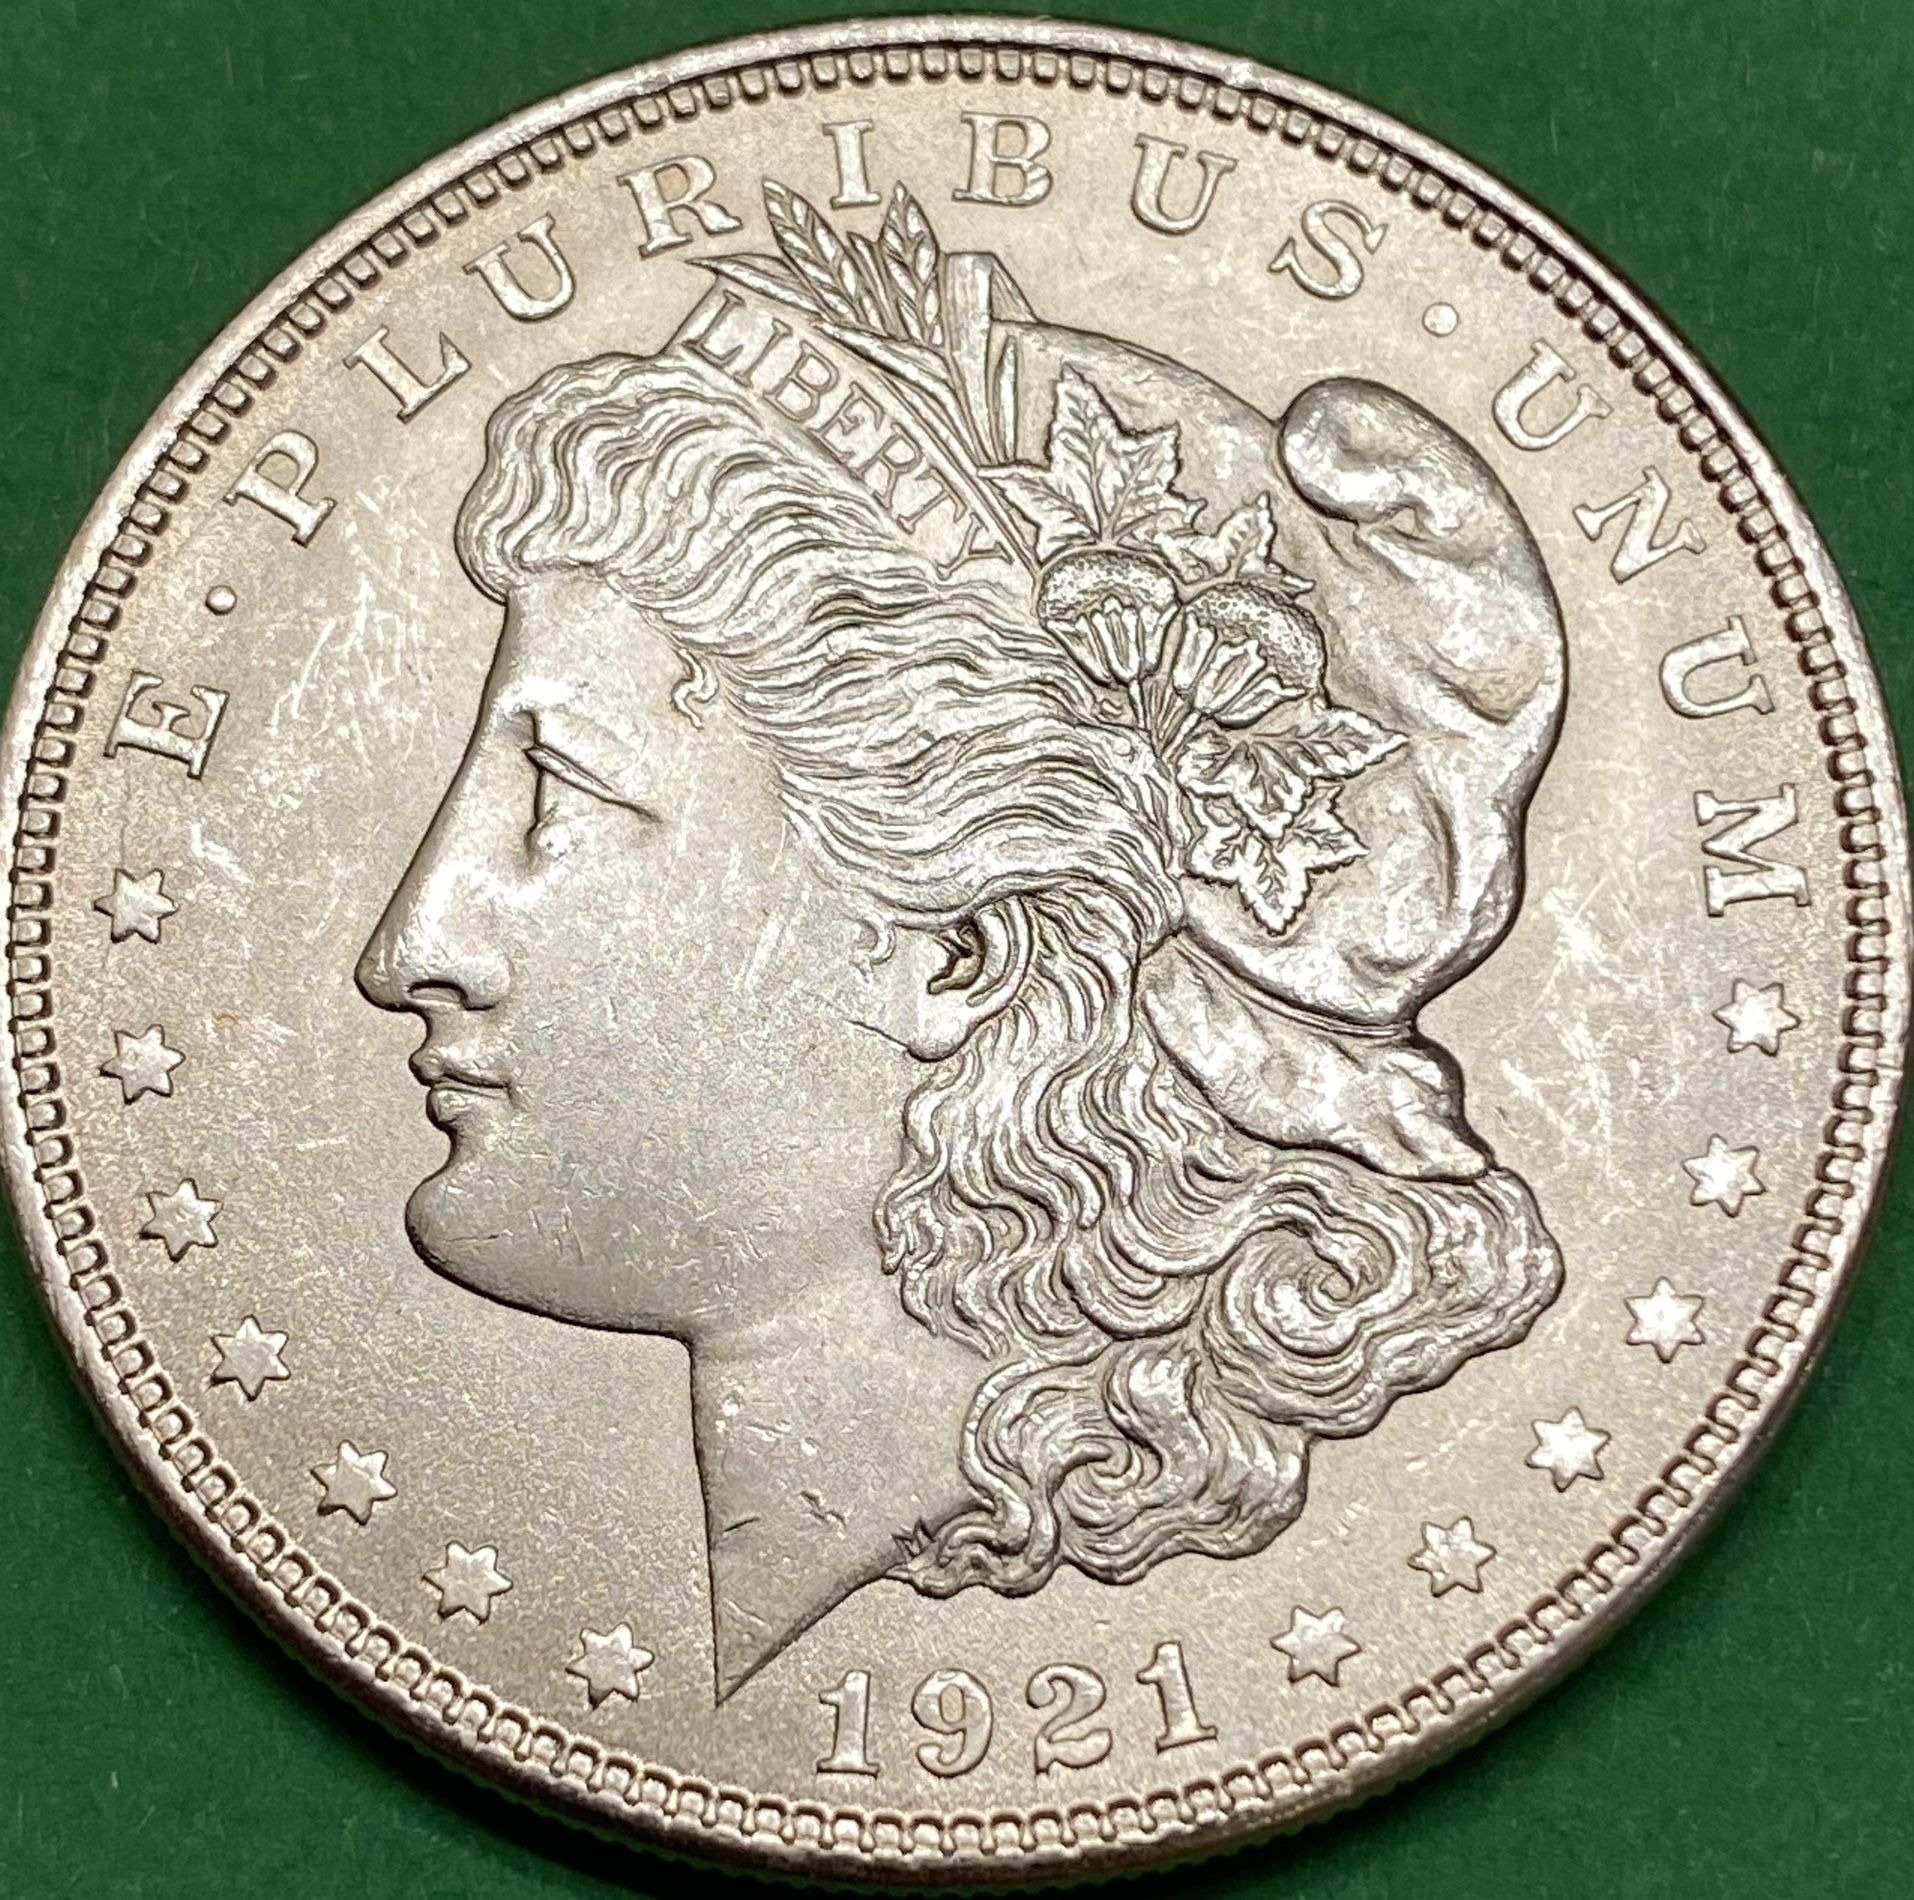 UNCIRCULATED 1921 -  MORGAN SILVER DOLLAR MINT STATE